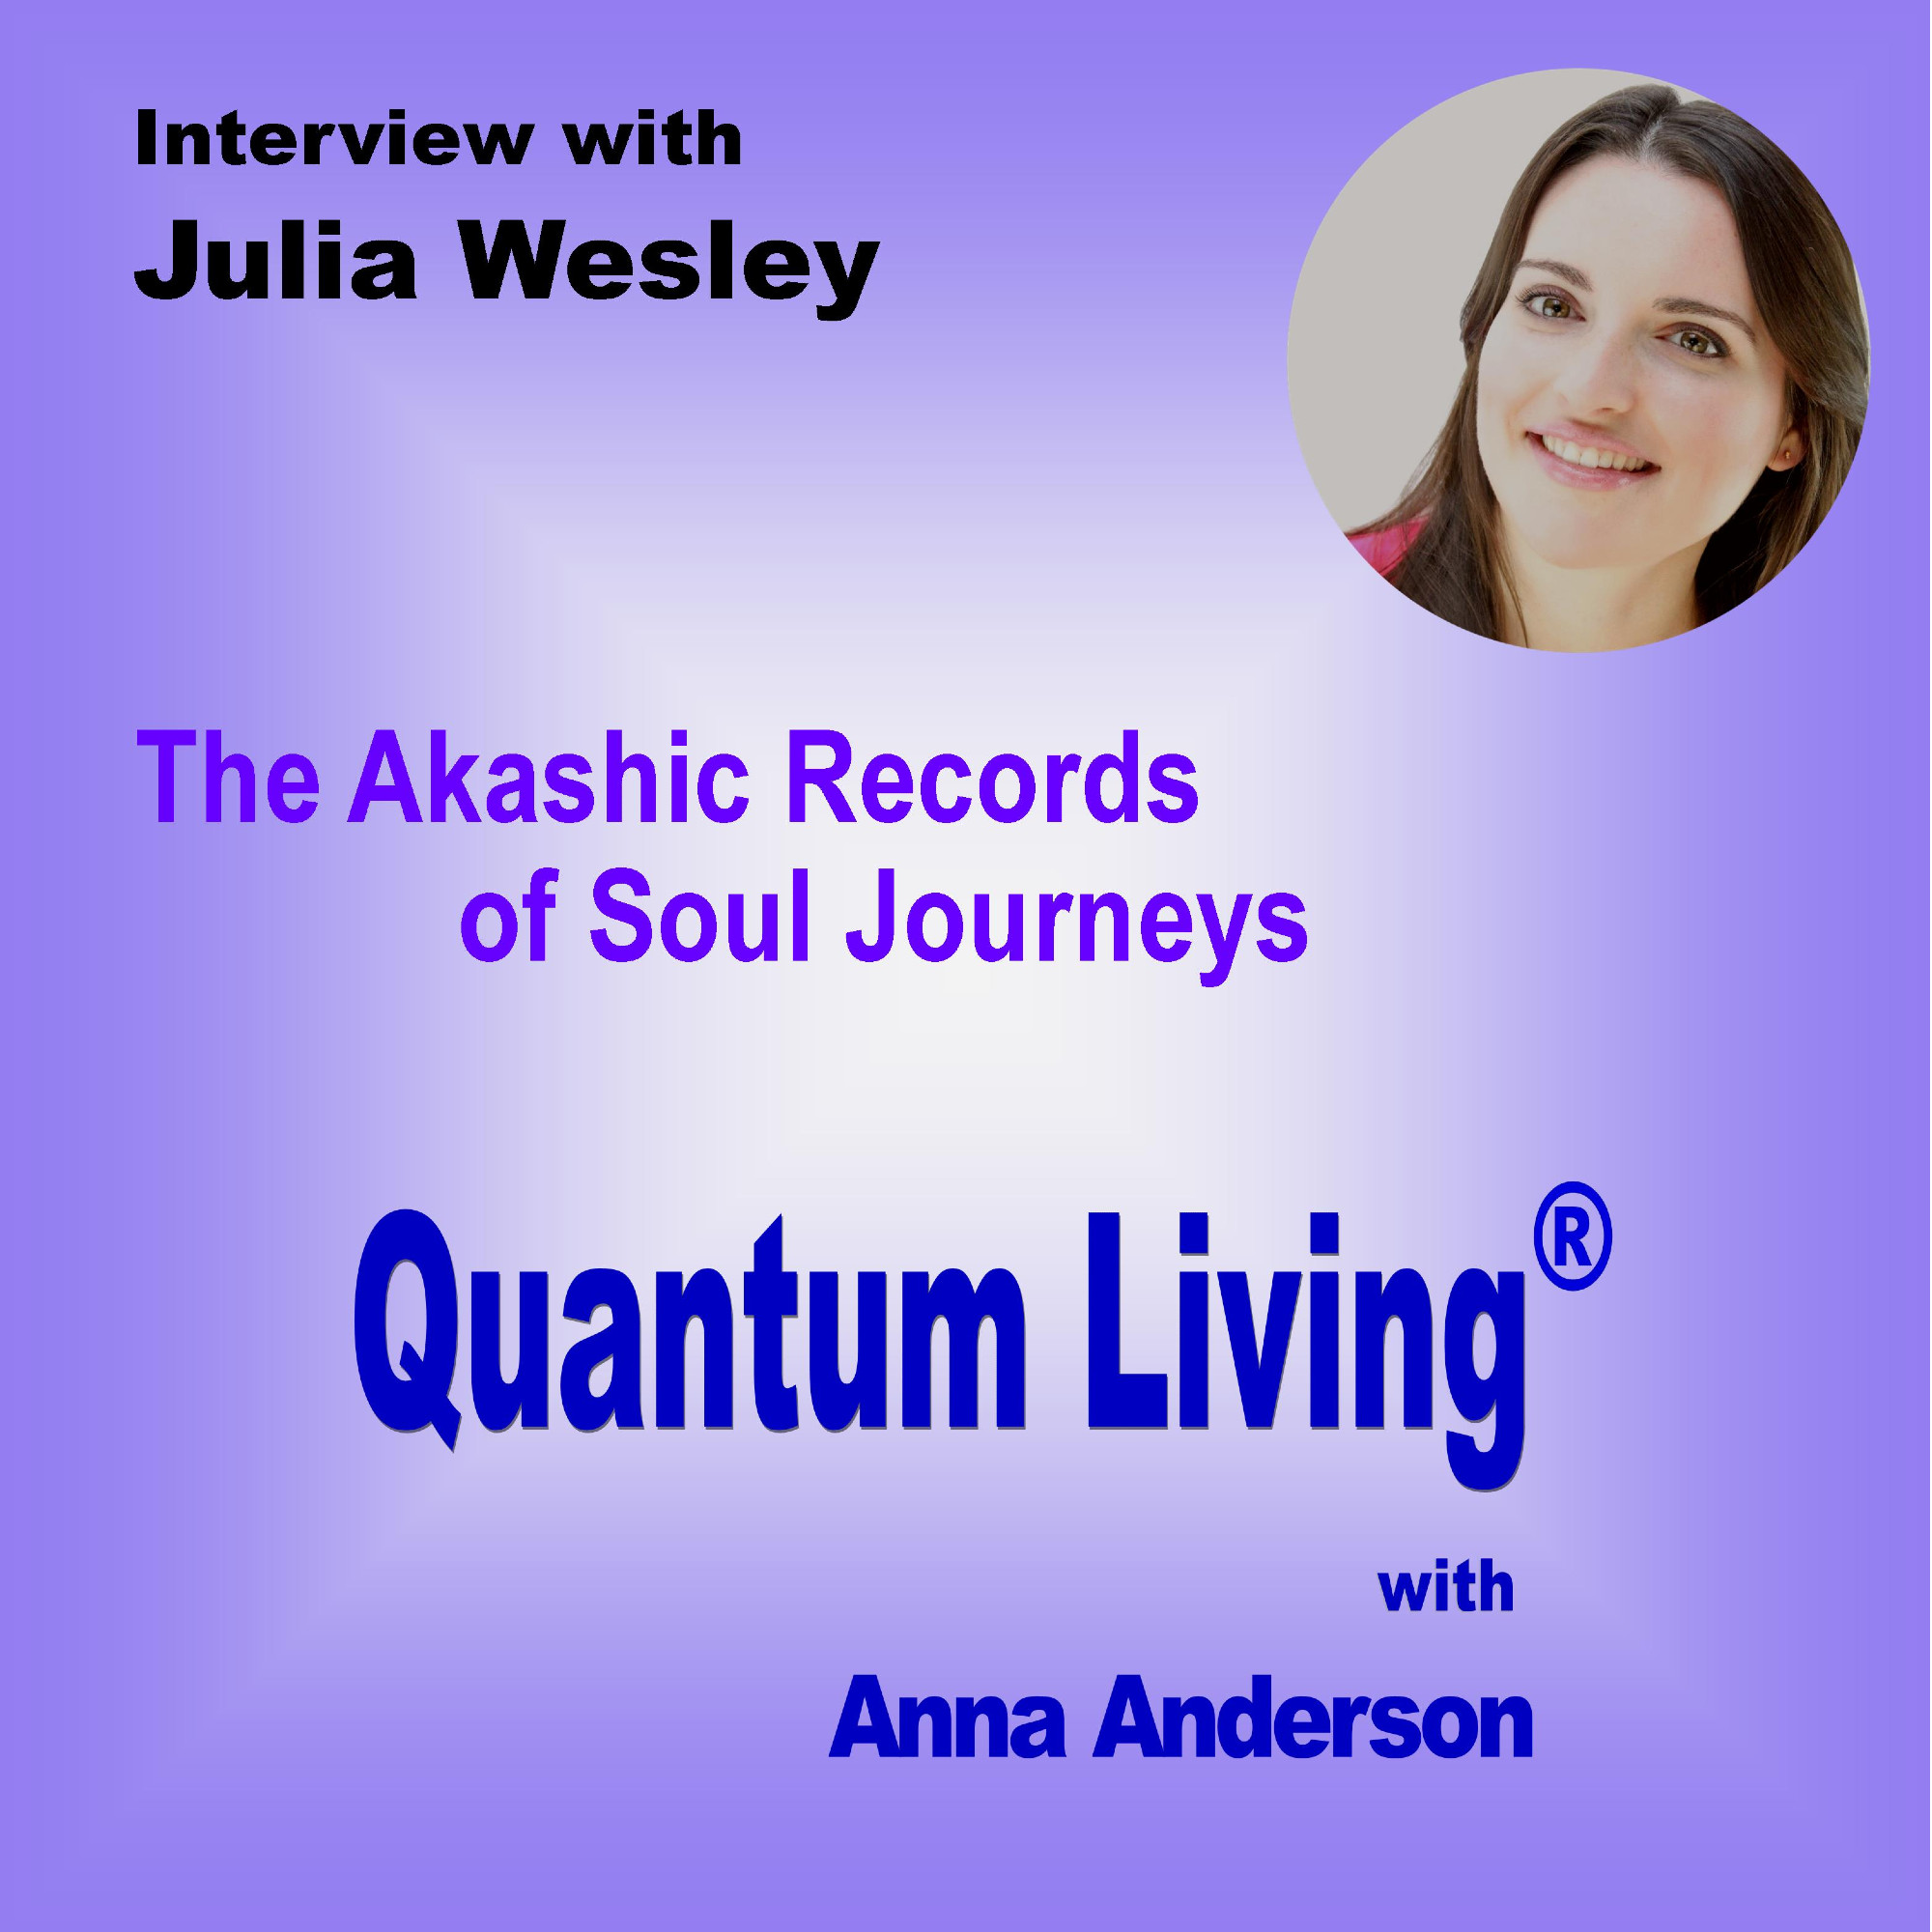 S3 E11: The Akashic Records of Soul Journeys